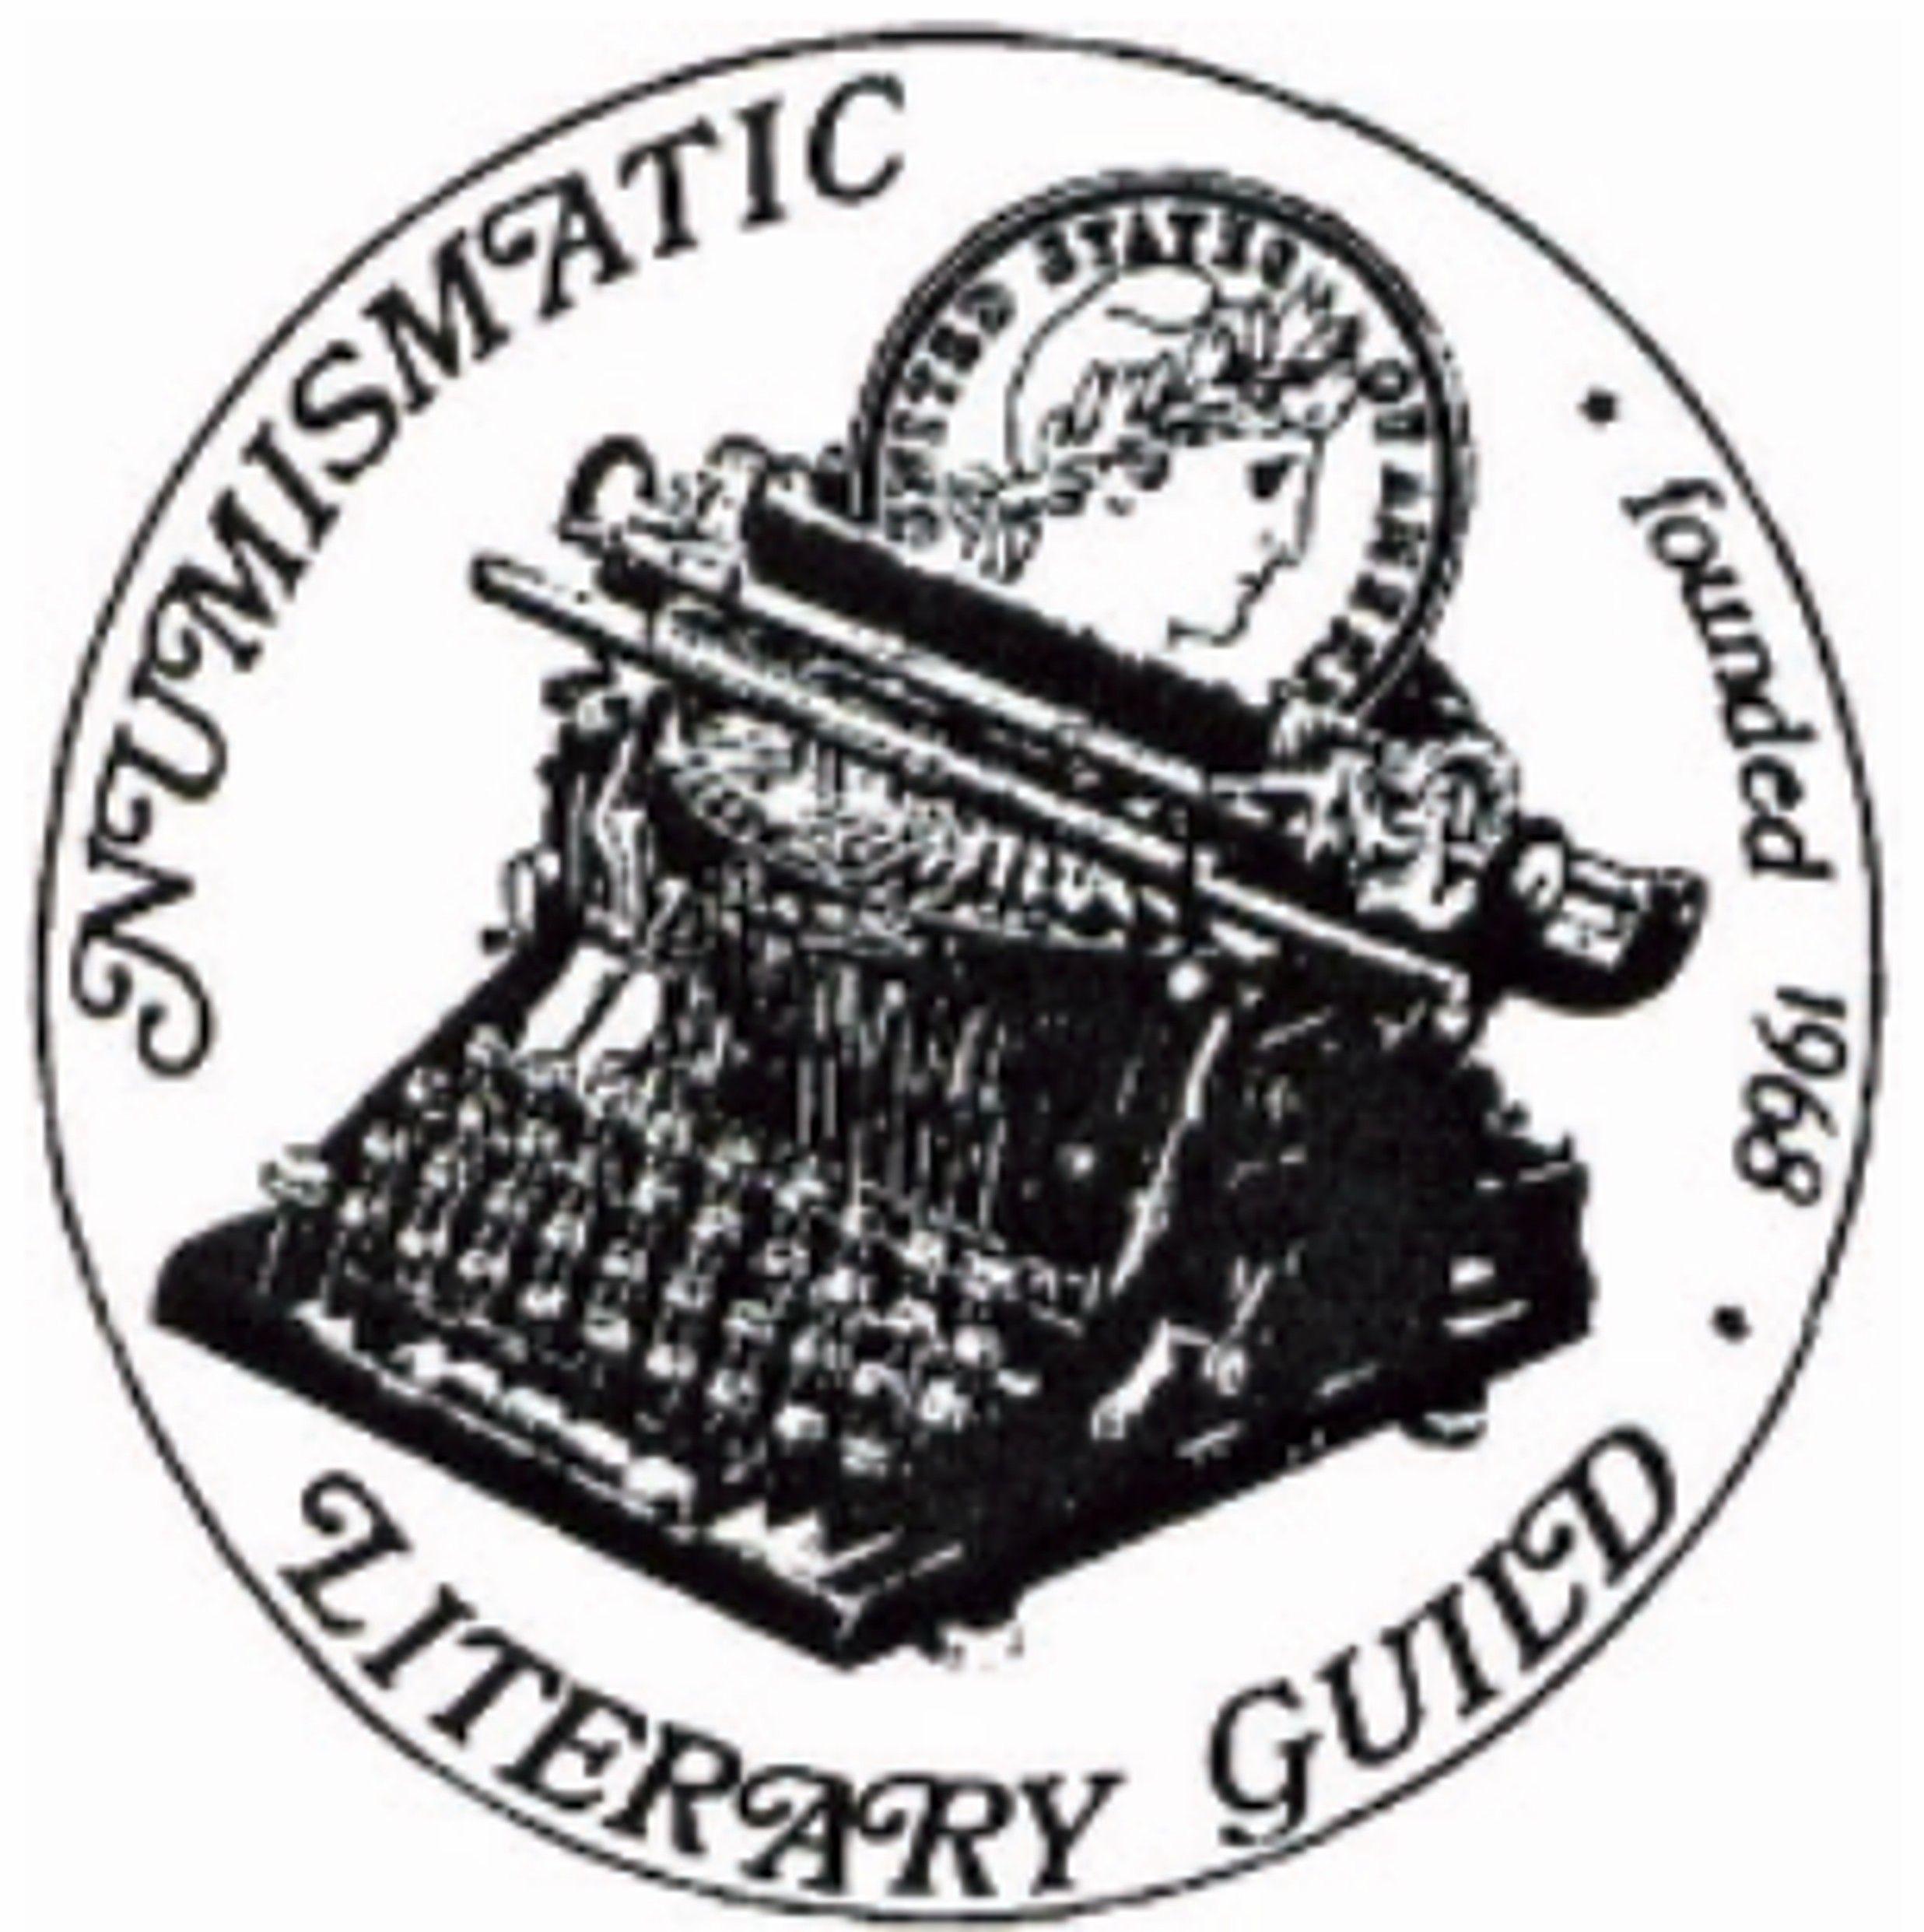 NLG Logo - NLG Announces Awards Competition for 2019 The Numismatic Literary ...